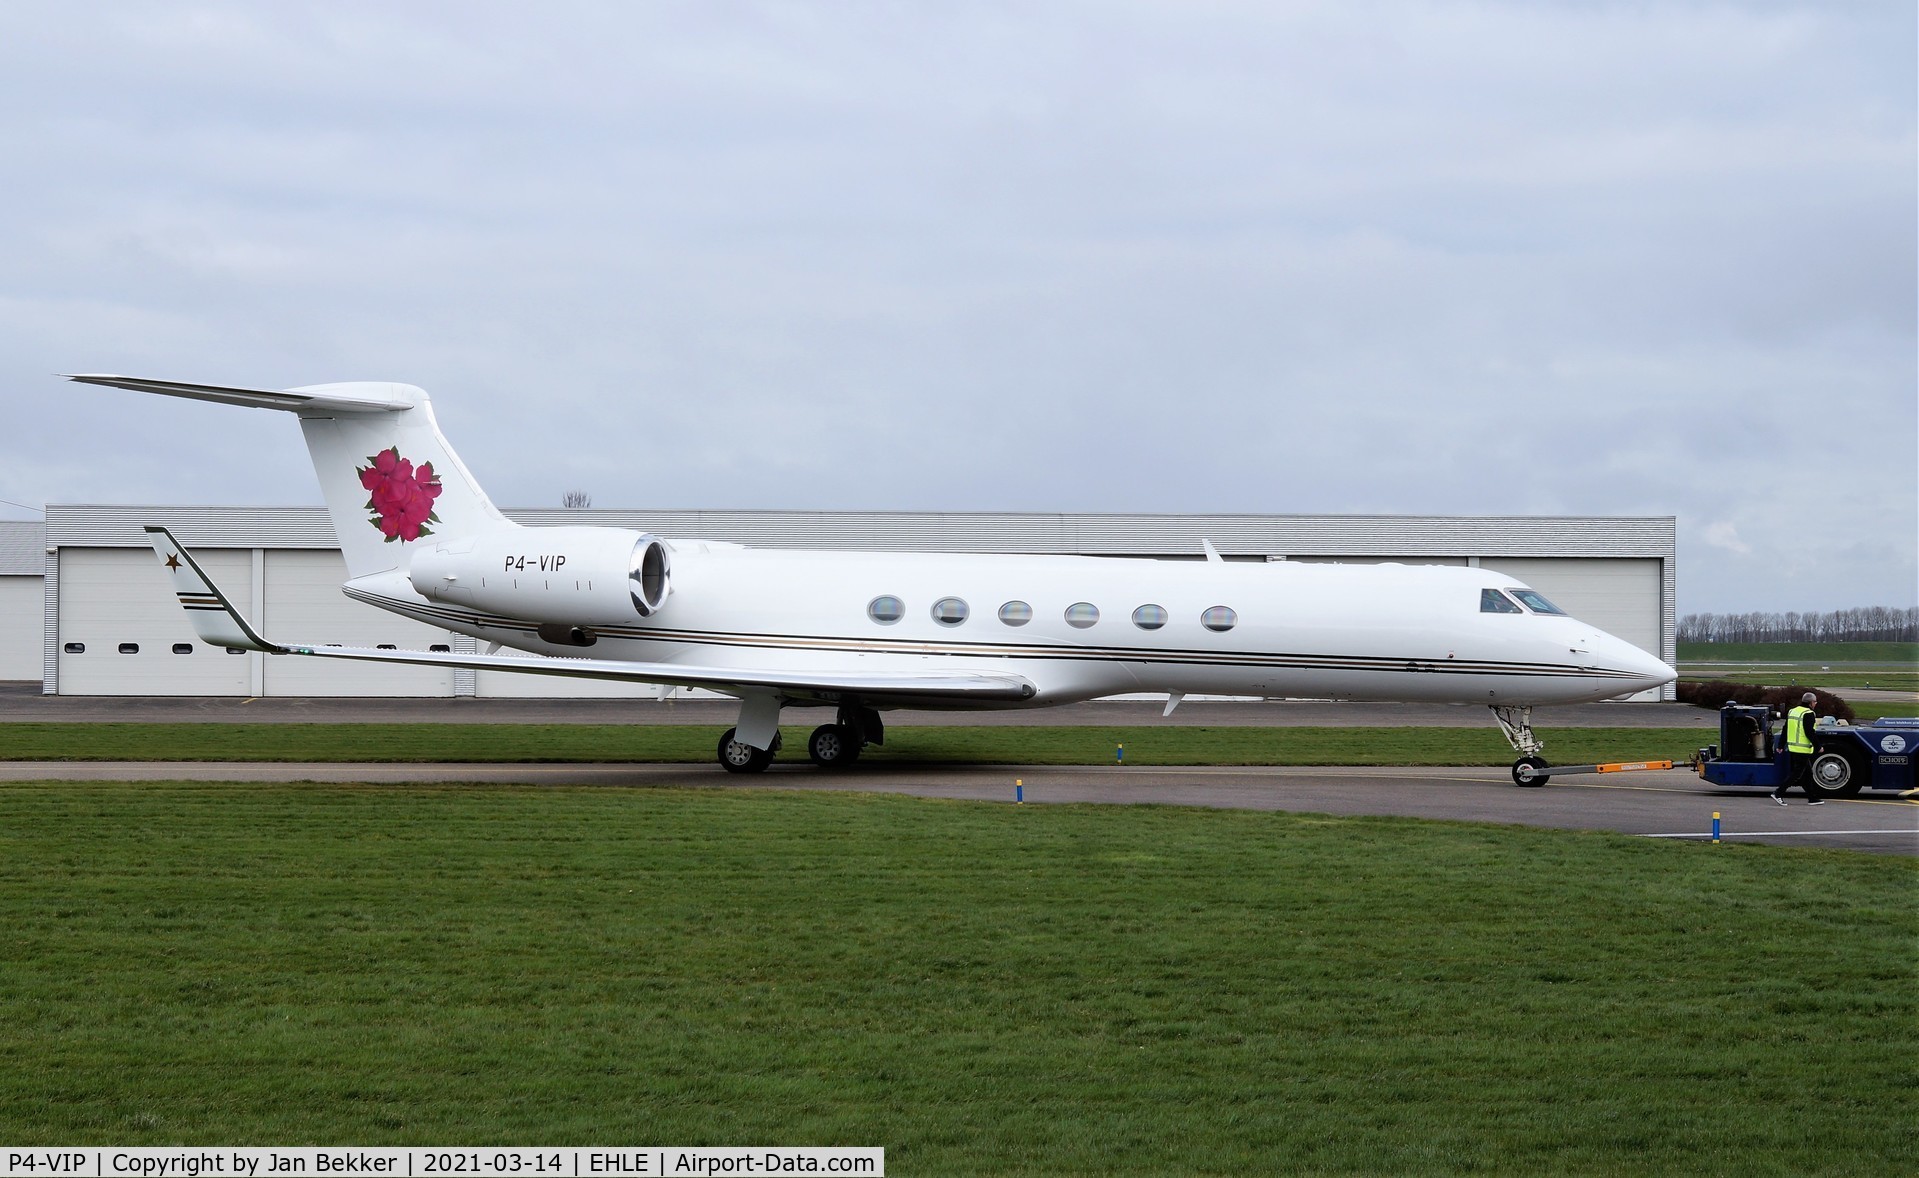 P4-VIP, Gulfstream Aerospace Gulstream V C/N 669, Towing to the ramp in its new livery